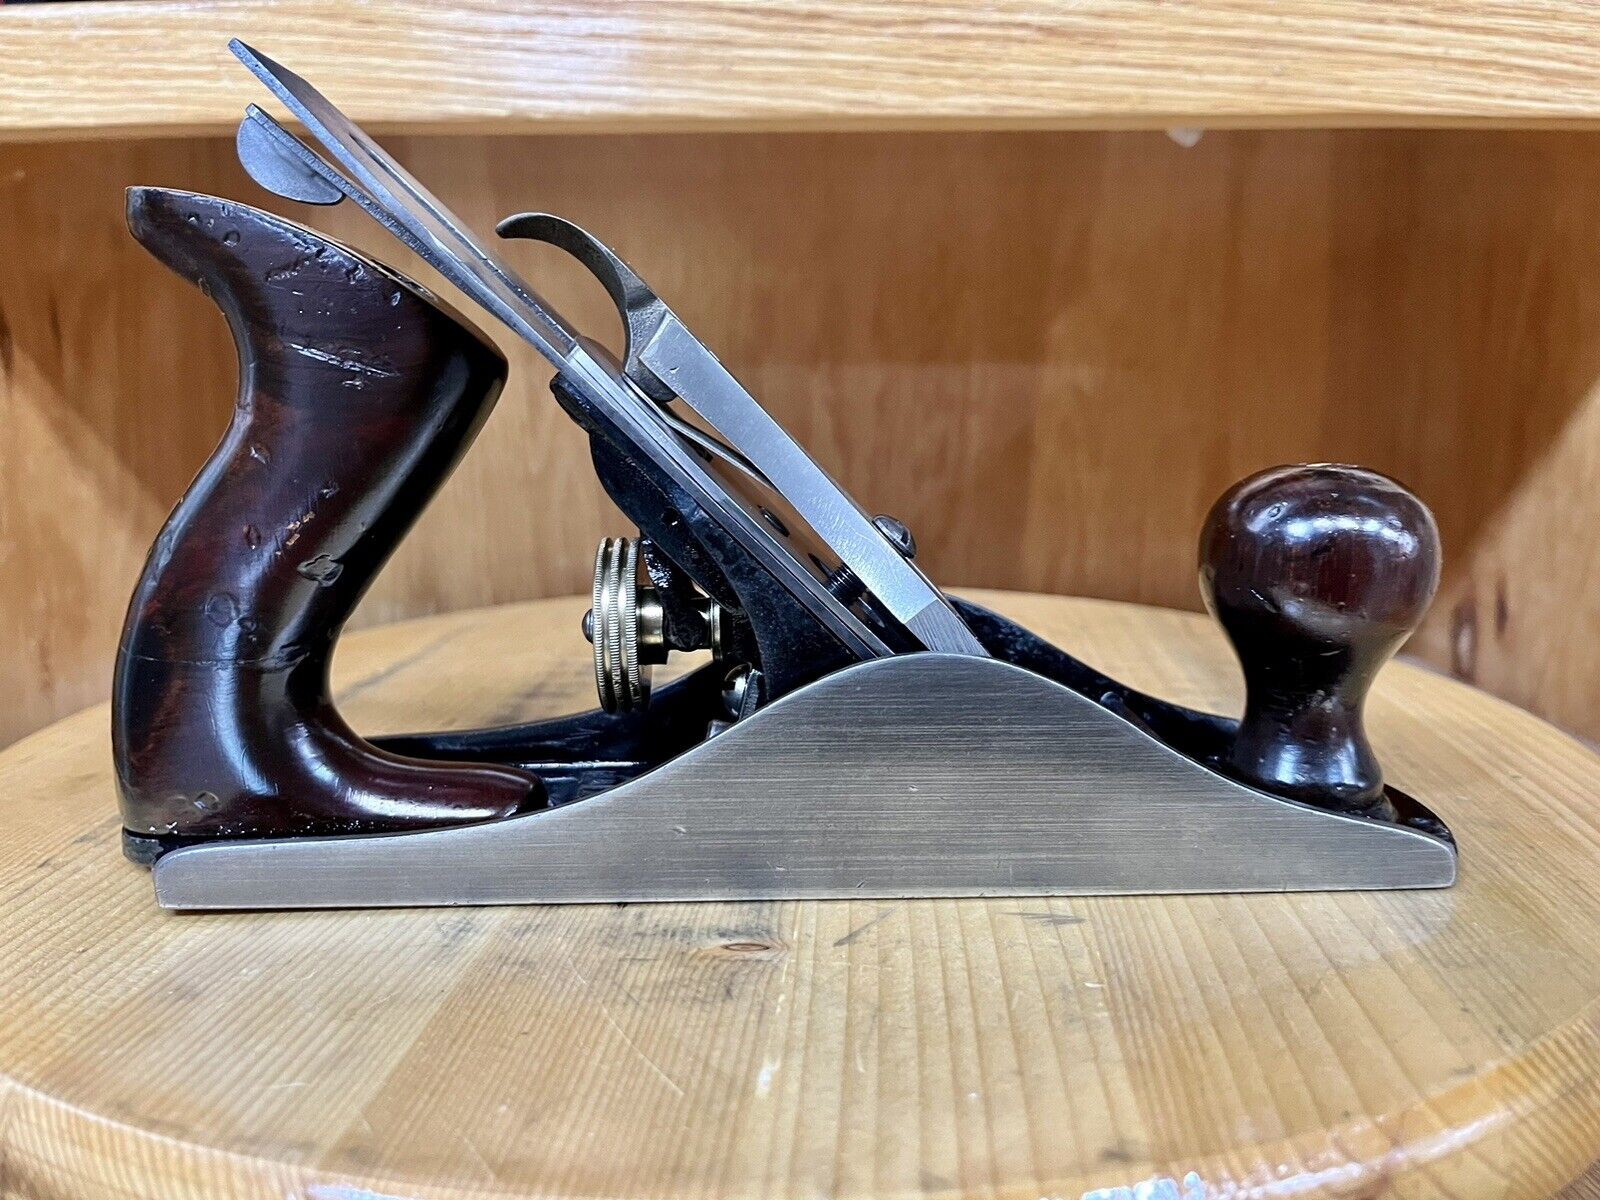 Vintage Pristine Stanley Bailey No 4 Plane Rosewood Beauty Sharpened, Shop Ready